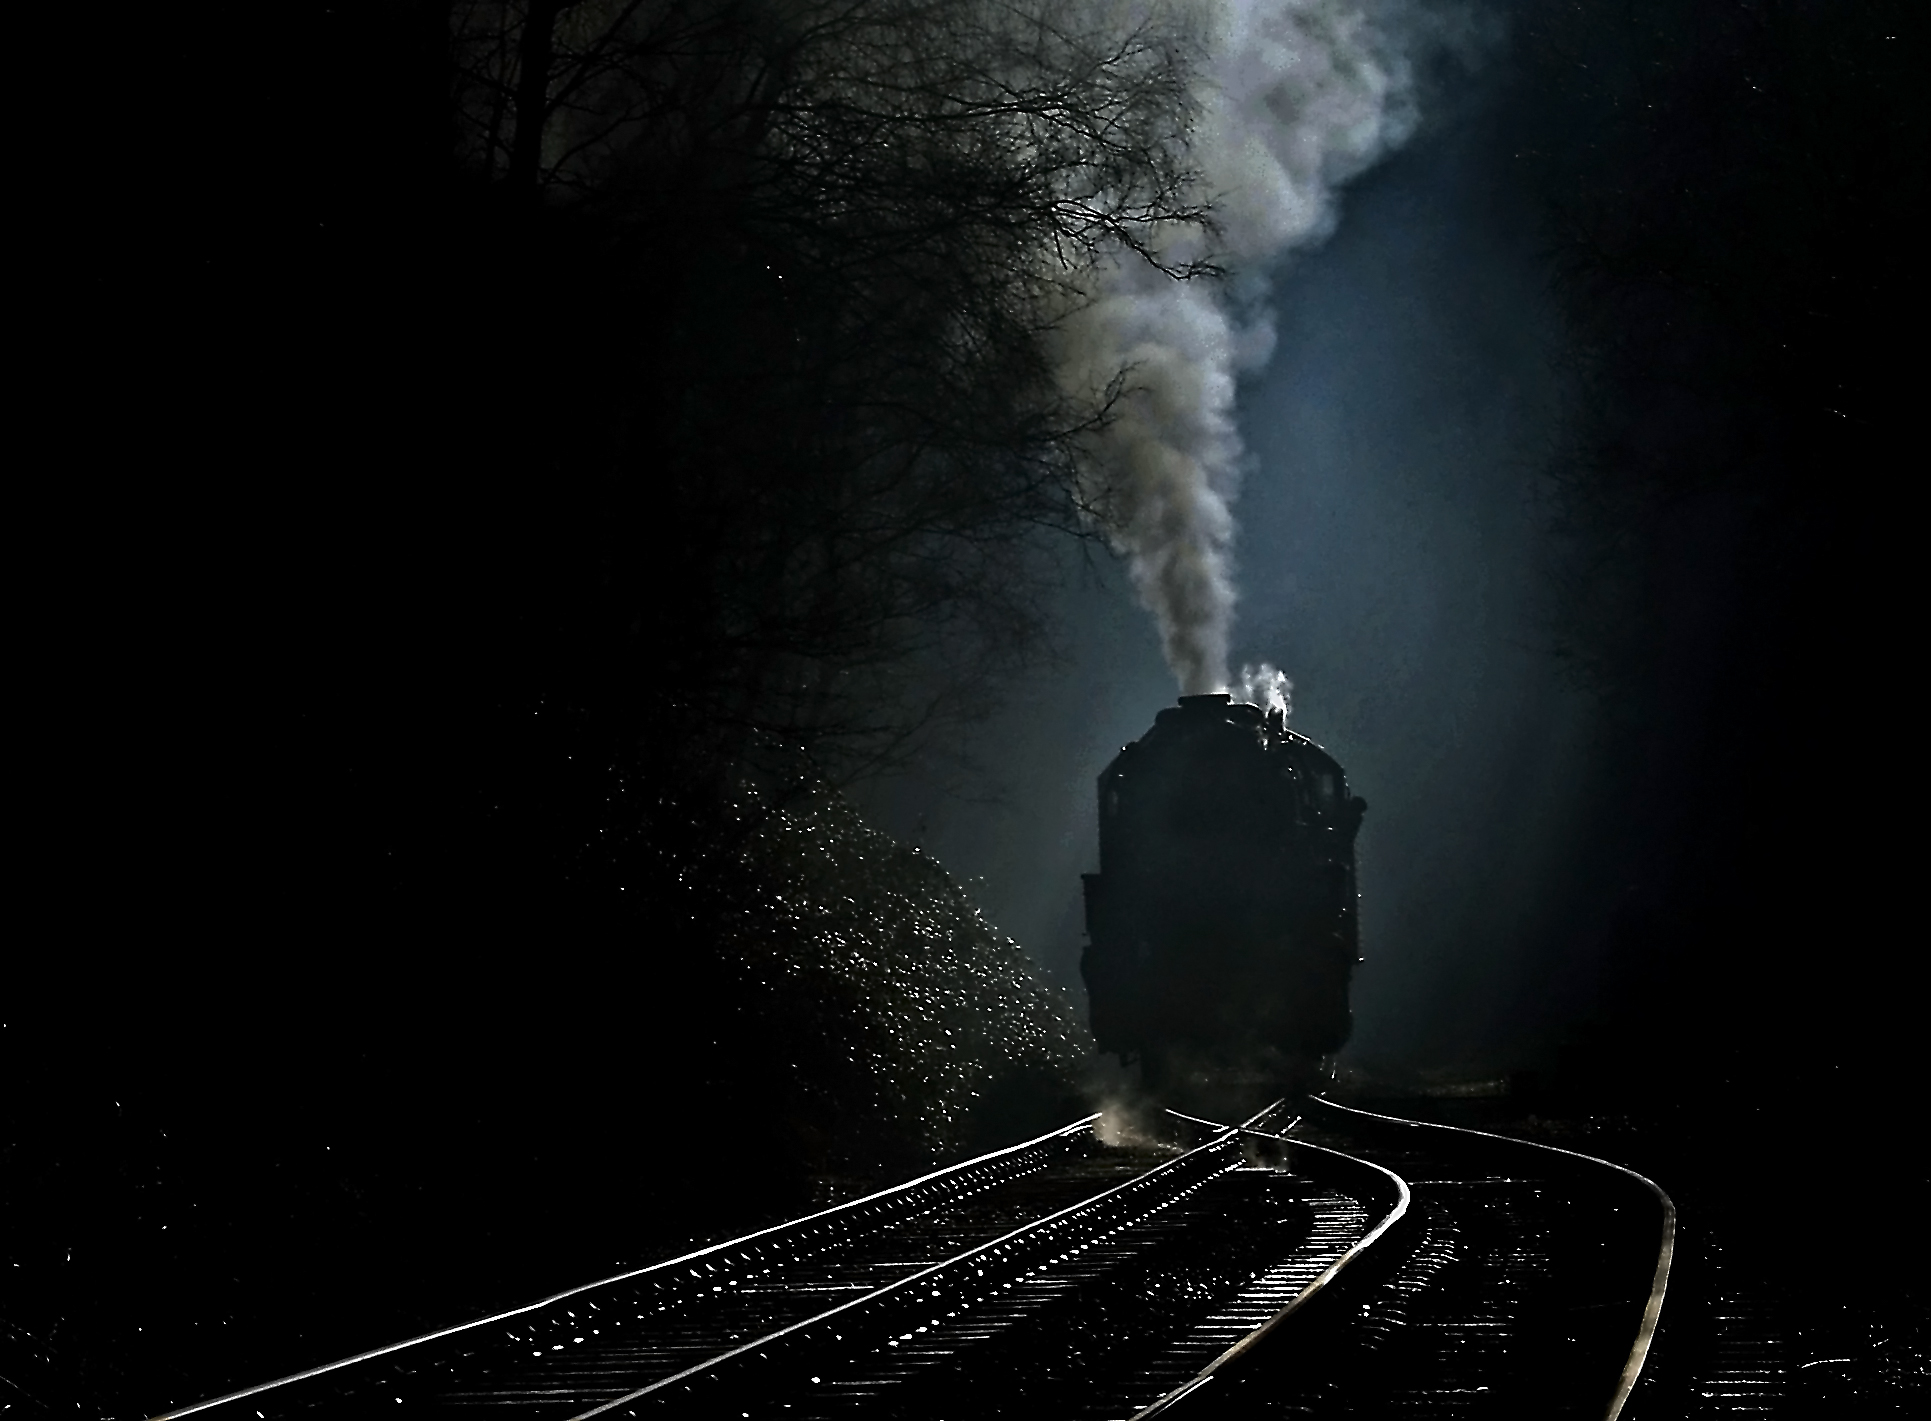 Wallpaper, night, water, sky, Halloween, smoke, train, Earth, ghost, universe, locomotive, midnight, steam, darkness, computer wallpaper, atmosphere of earth, black and white, outer space, phenomenon, ghosttrain, graphy, visual effects